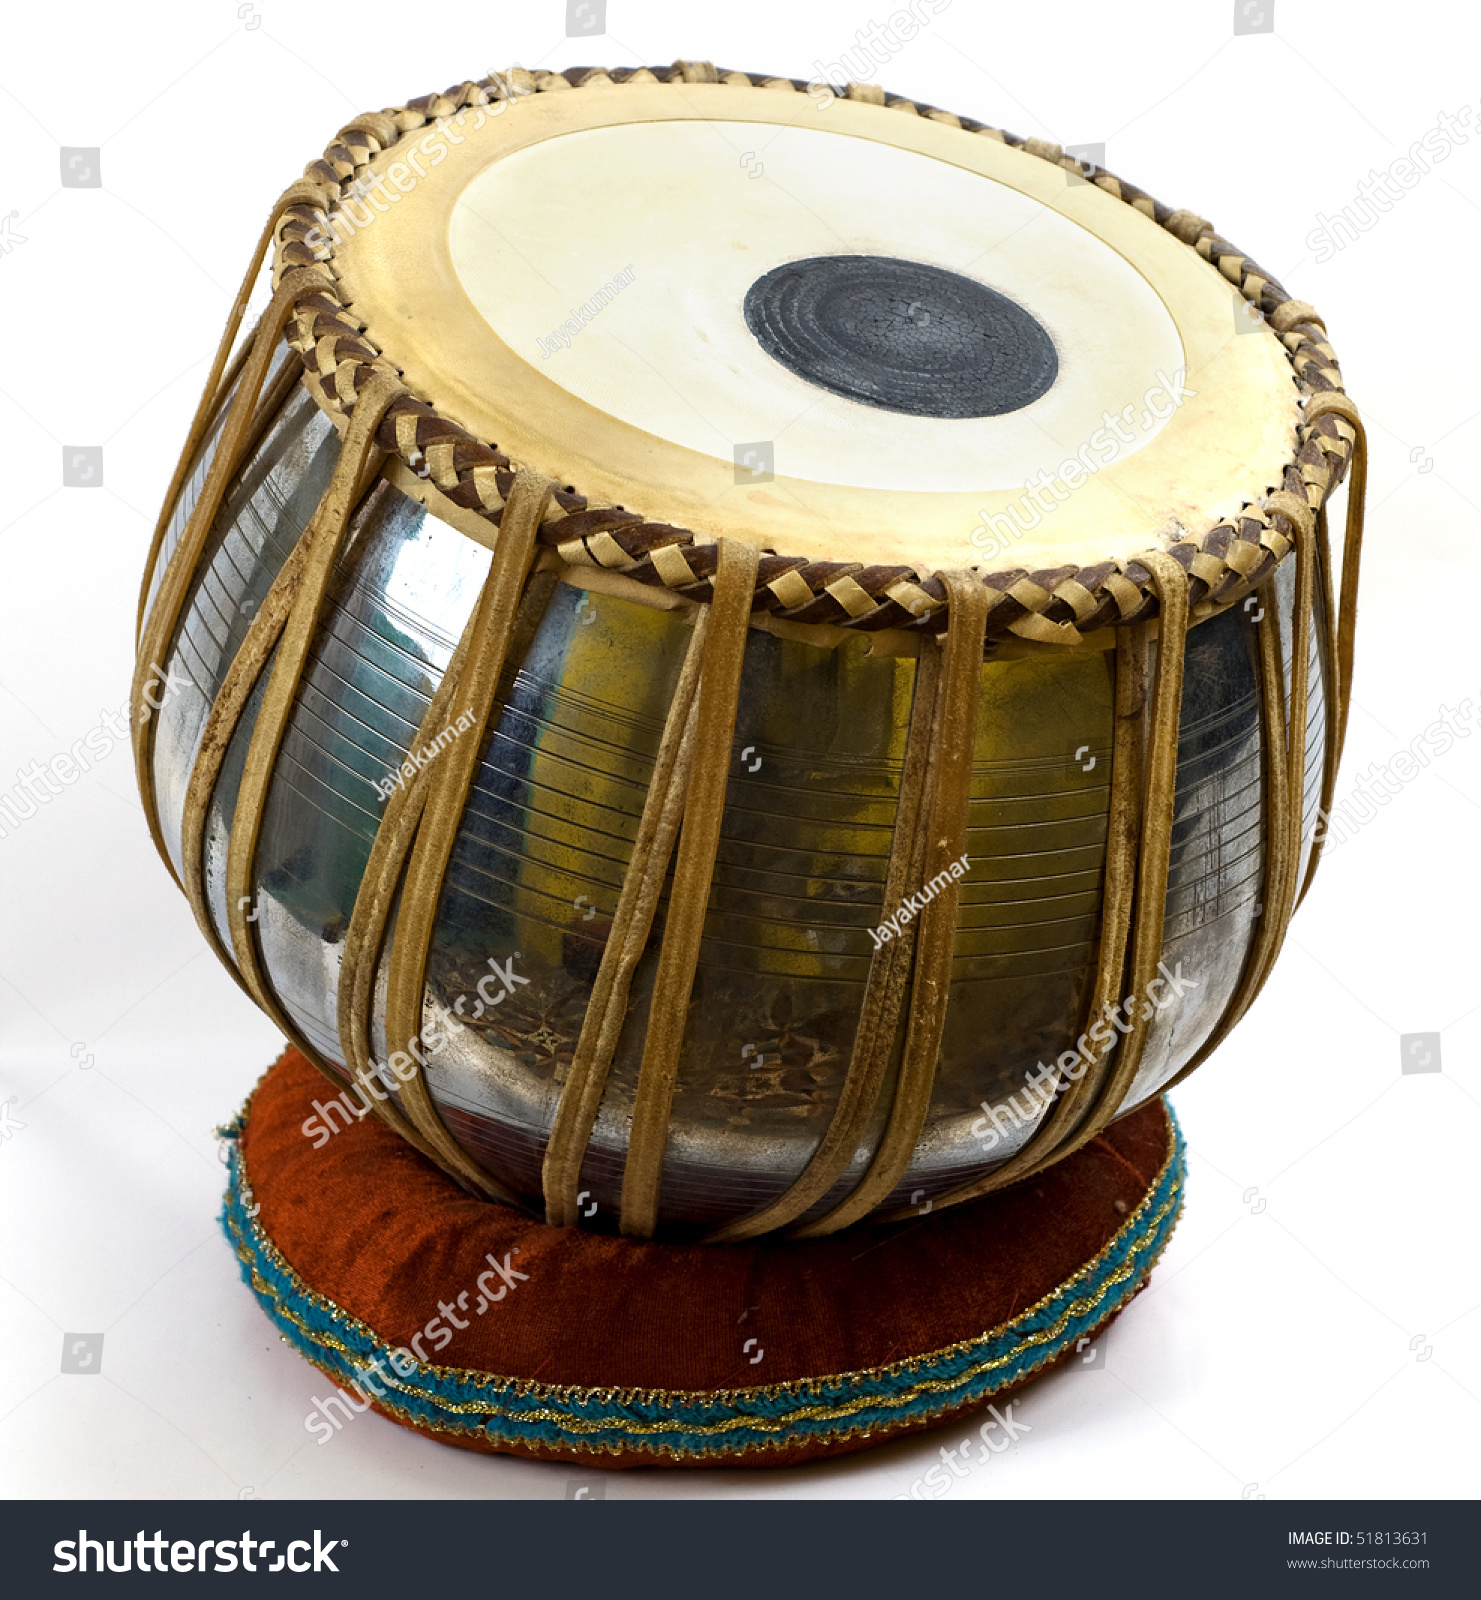 Table Musical Instrument Stock Photo 51813631 | Shutterstock